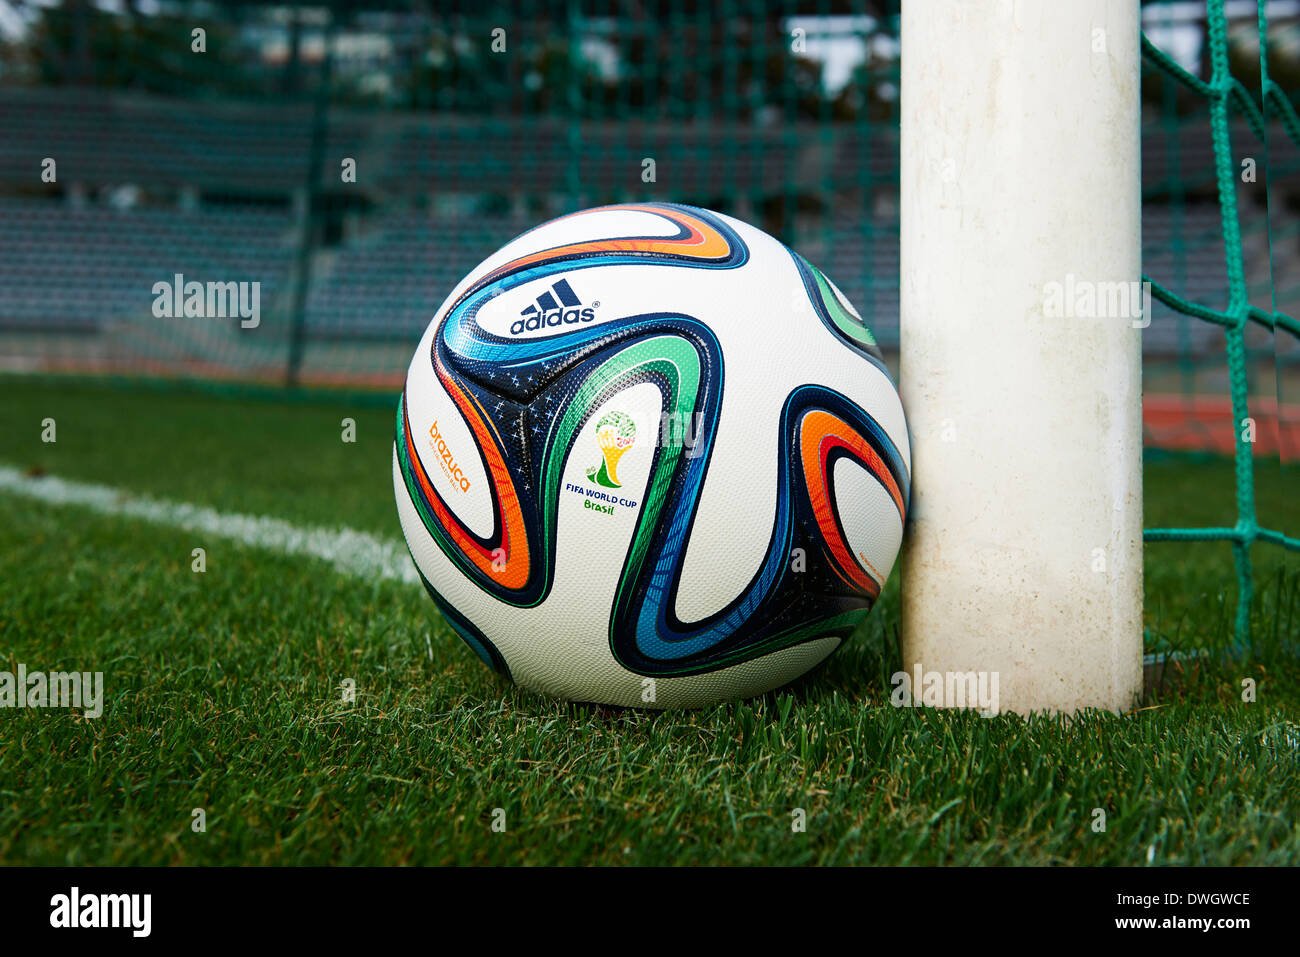 Brazuca, official matchball of FIFA World Cup Brazil 2014 Stock Photo